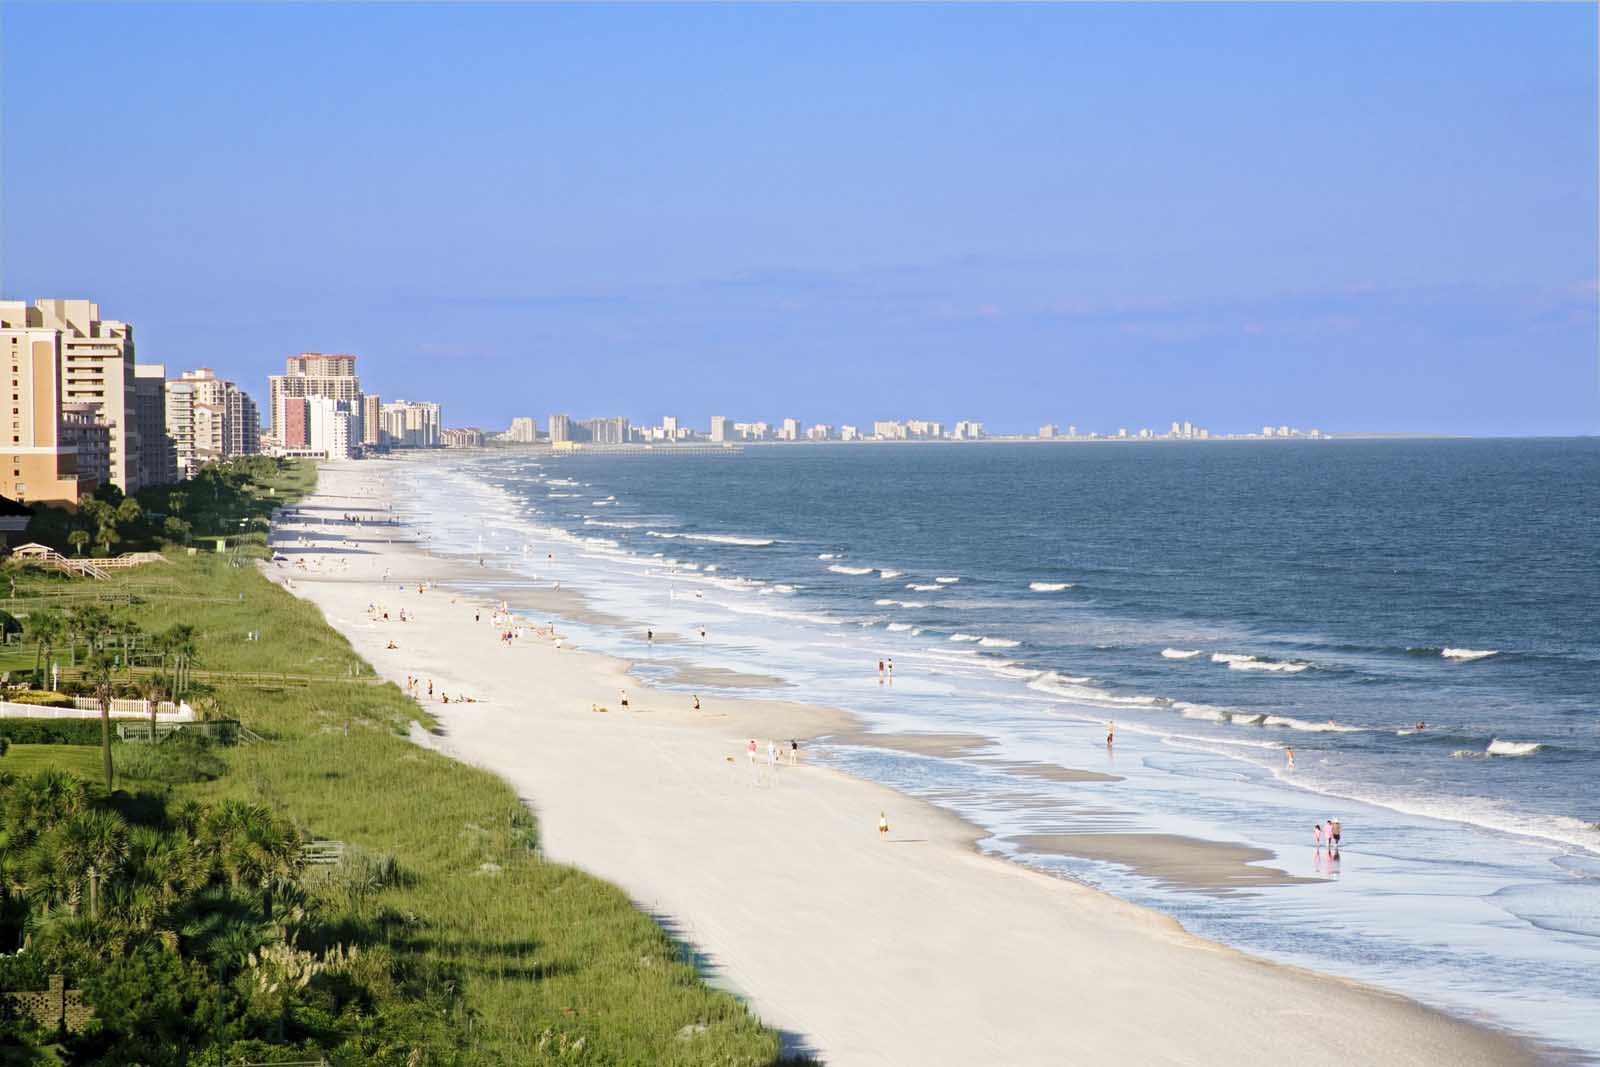 How to get to Myrtle Beach South Carolina